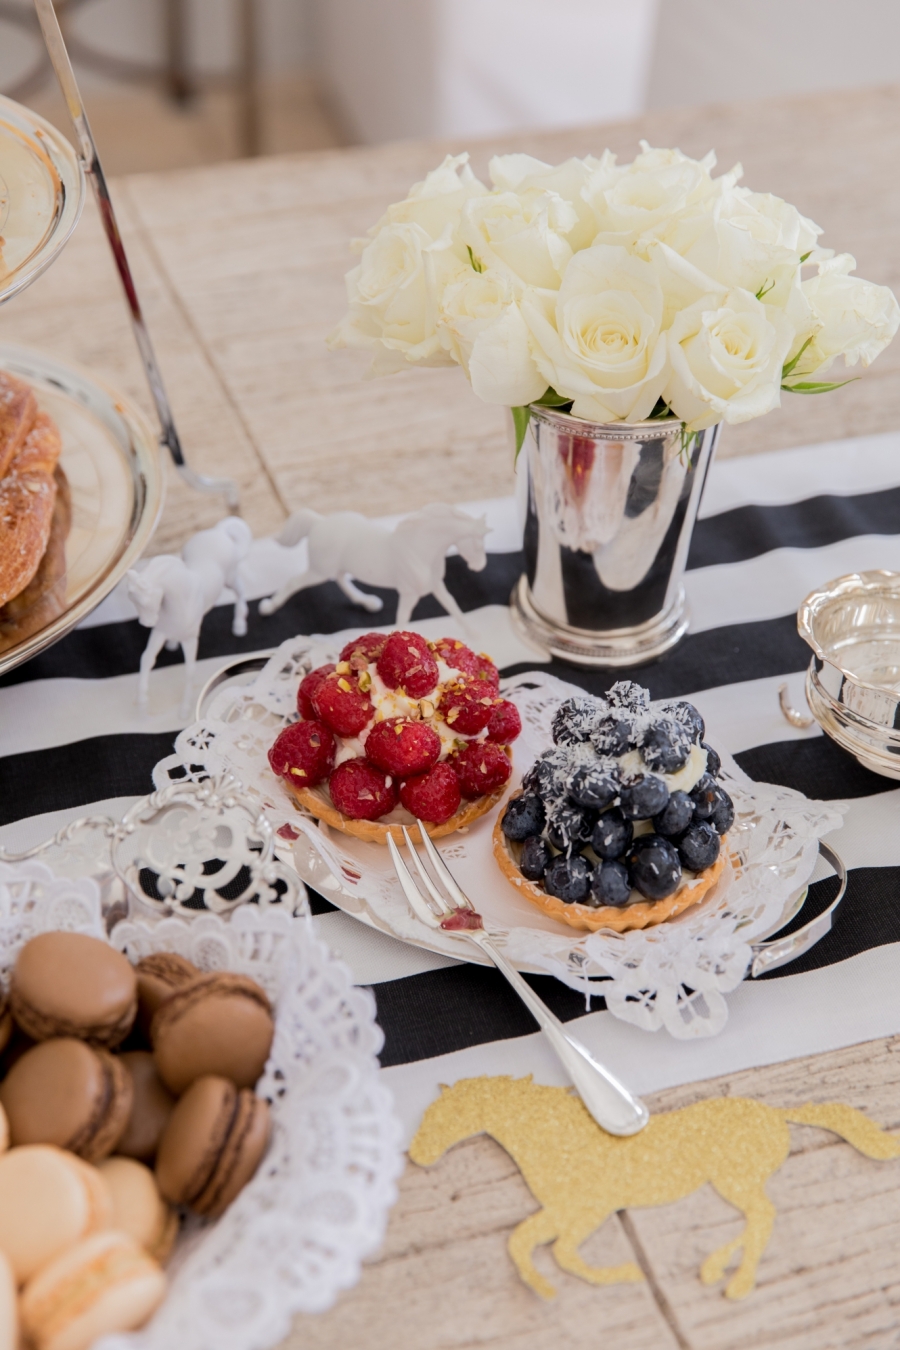 How to Host a Chic Kentucky Derby Party - Fashionable Hostess